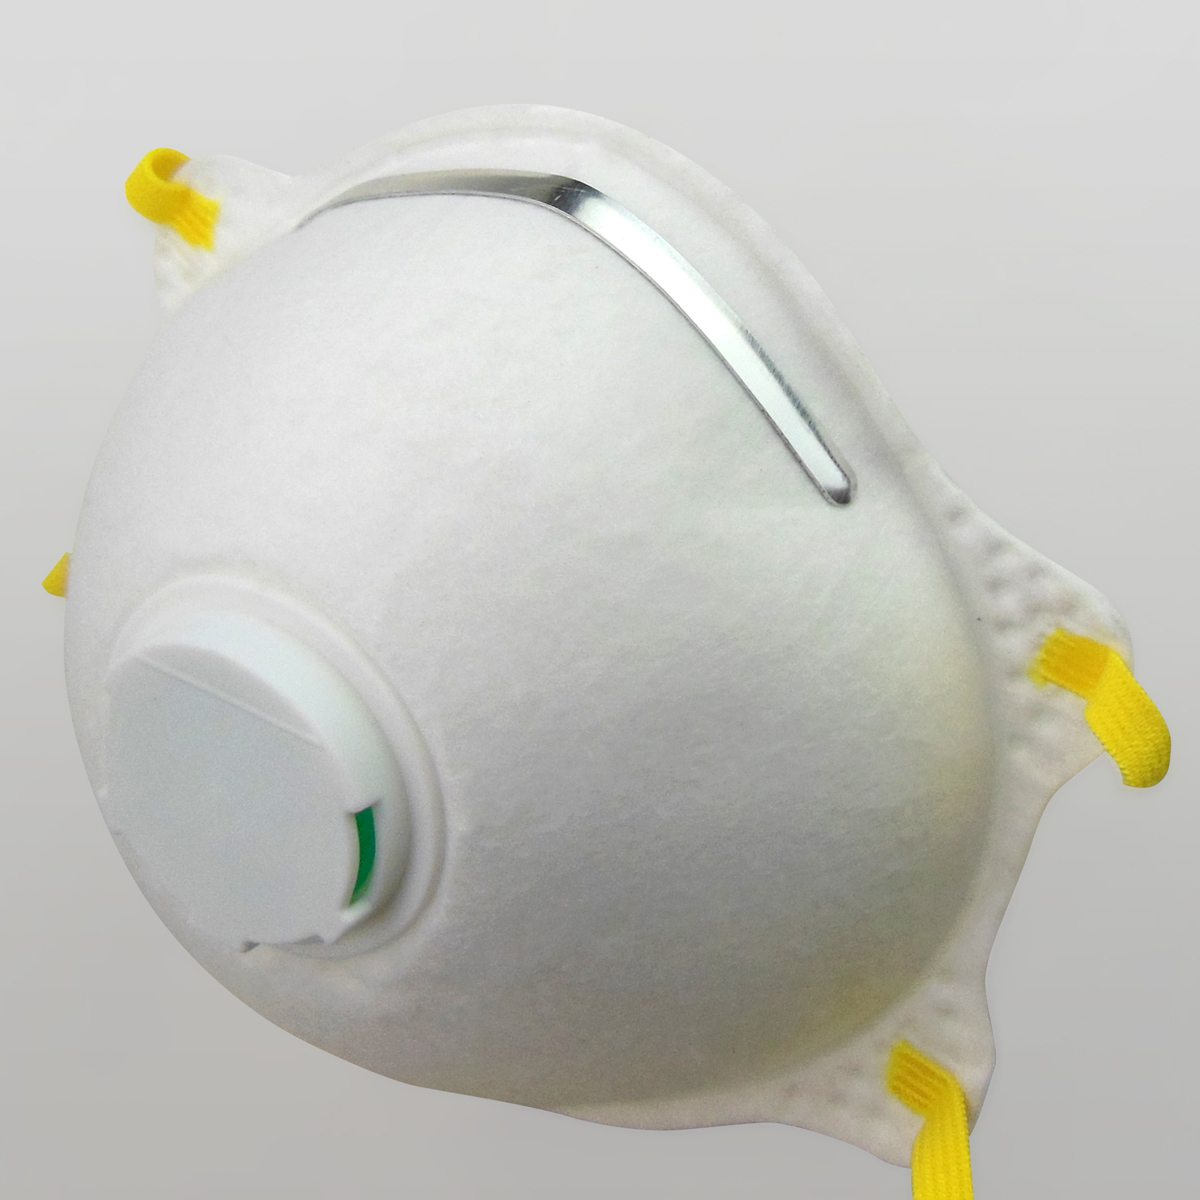 Cup Face Mask With Valve (Head-Belt Style)